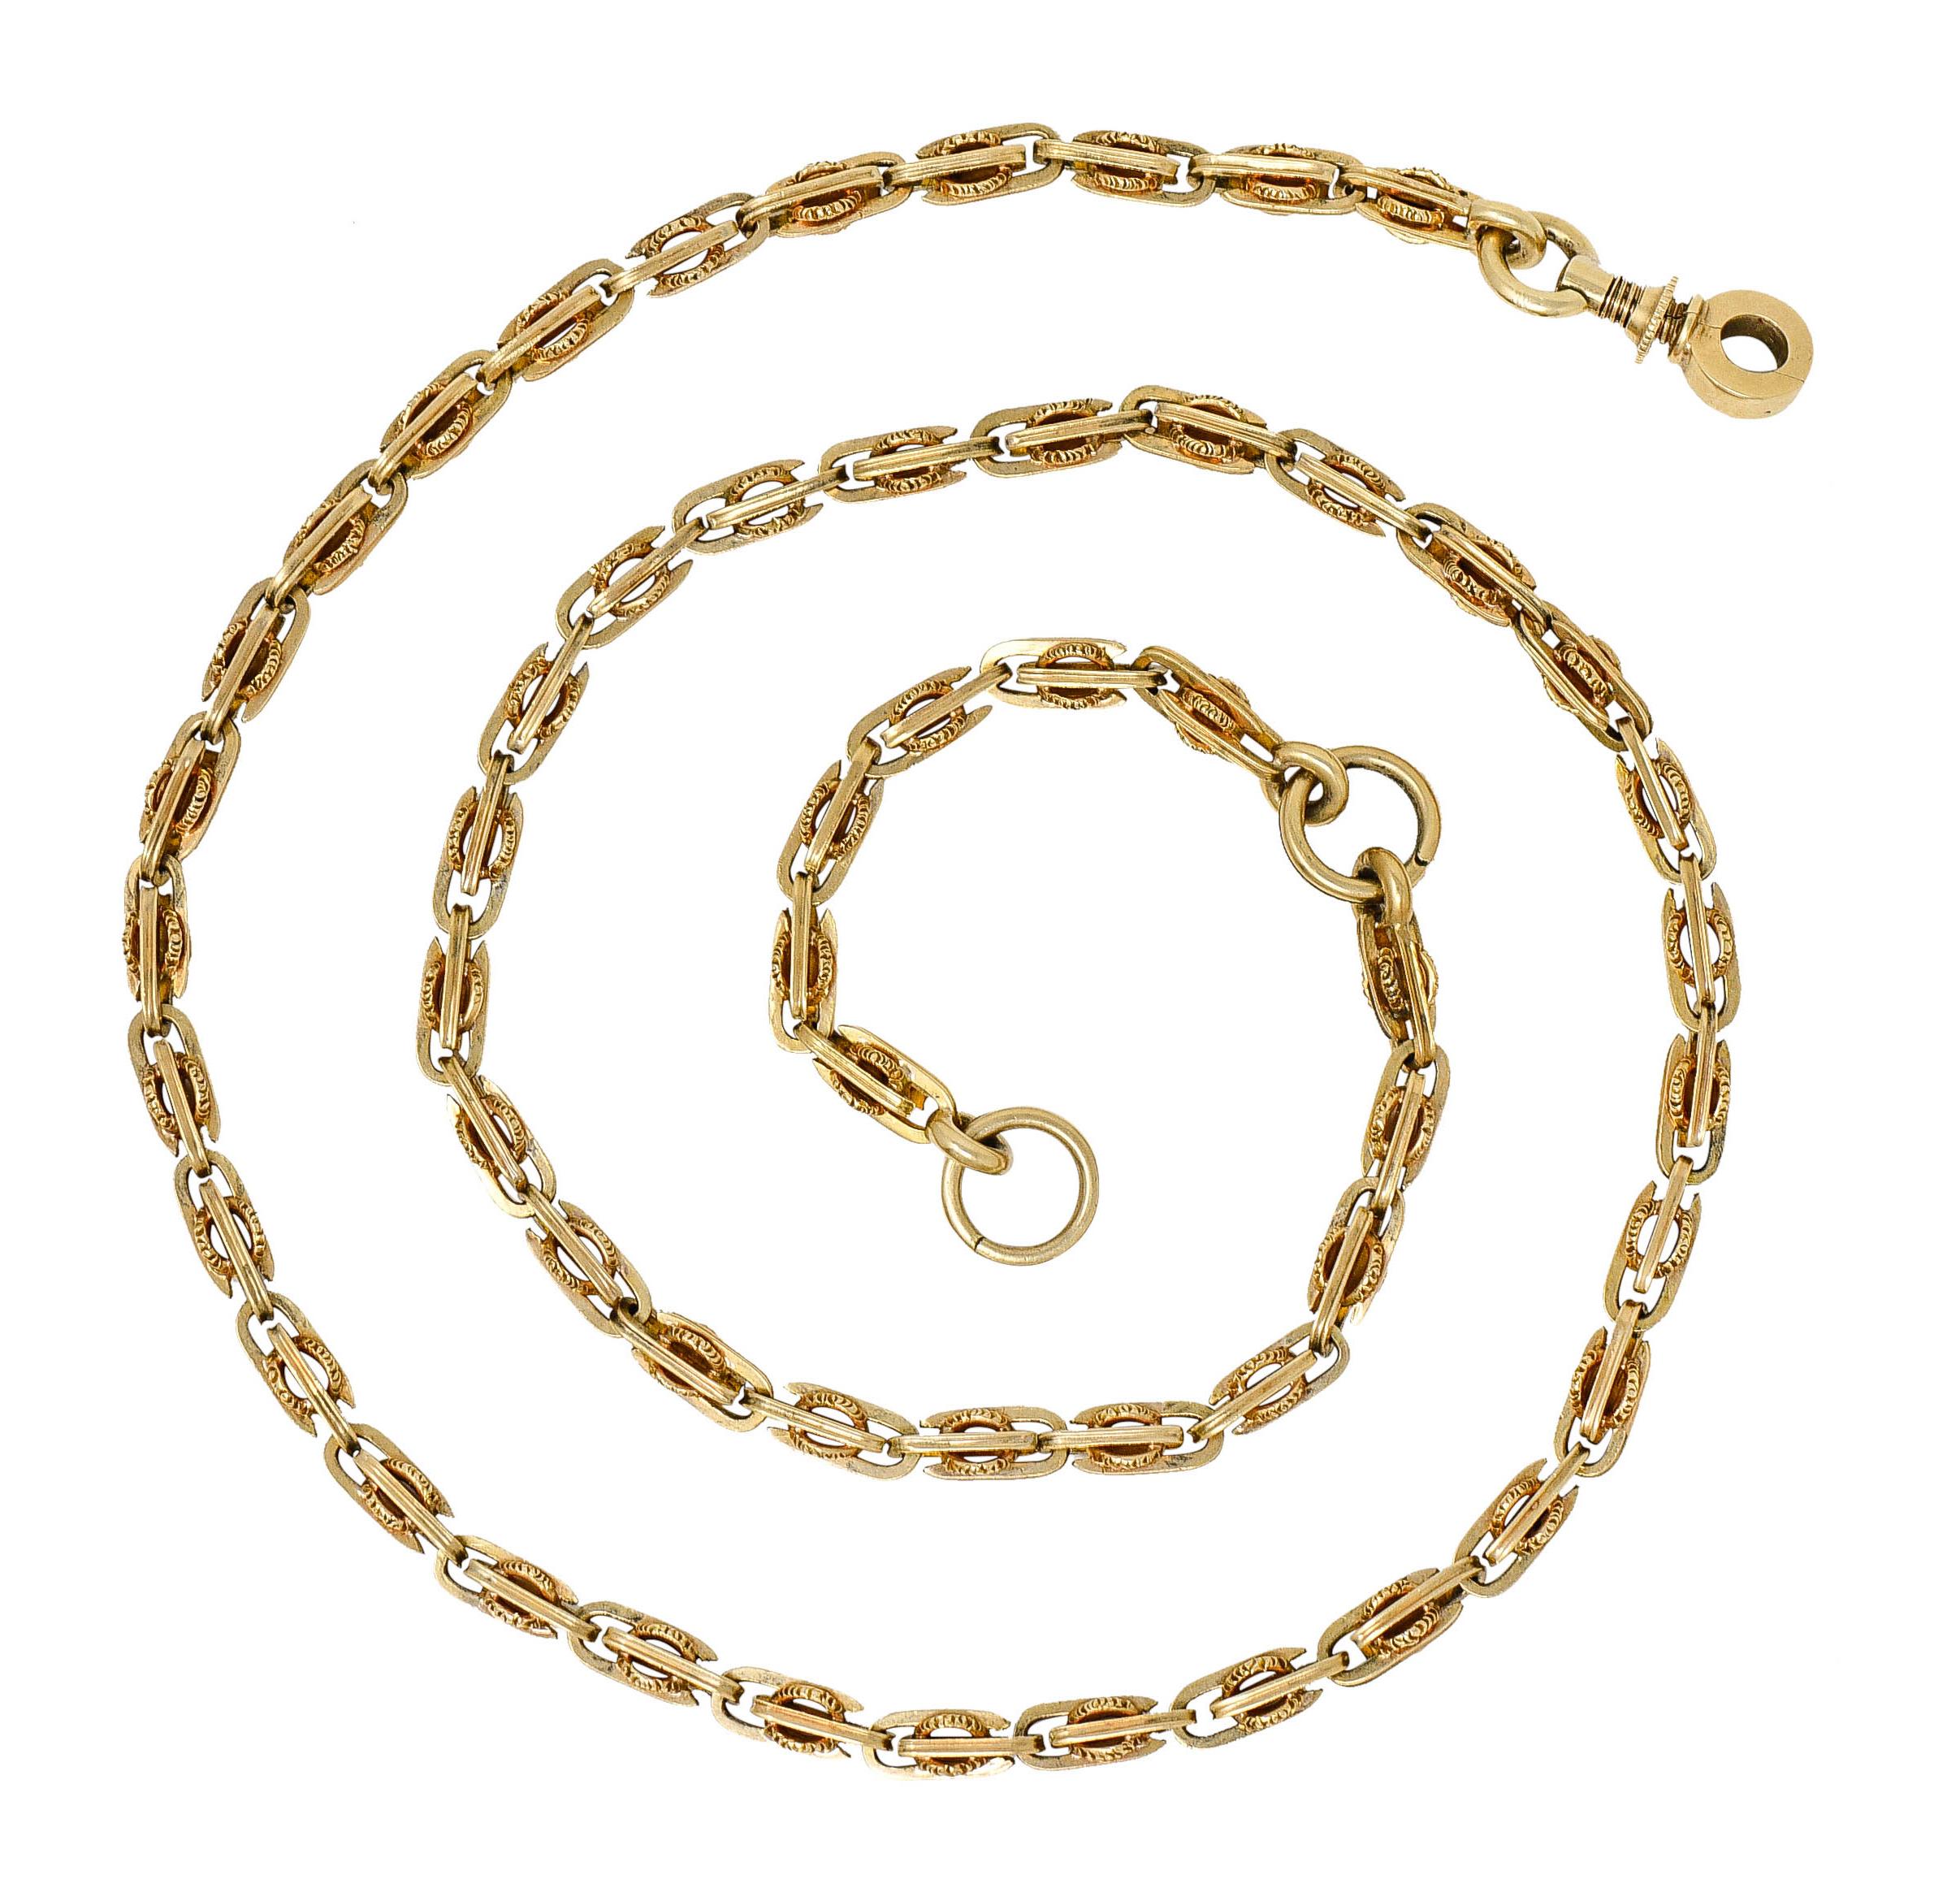 Necklace is comprised of barrel style links

Deeply grooved with texturous accenting

With two jump ring stations for adjustable length and style

Completed by an antique clasp the opens on a hinge

Securely locks closed via a safety that screws in